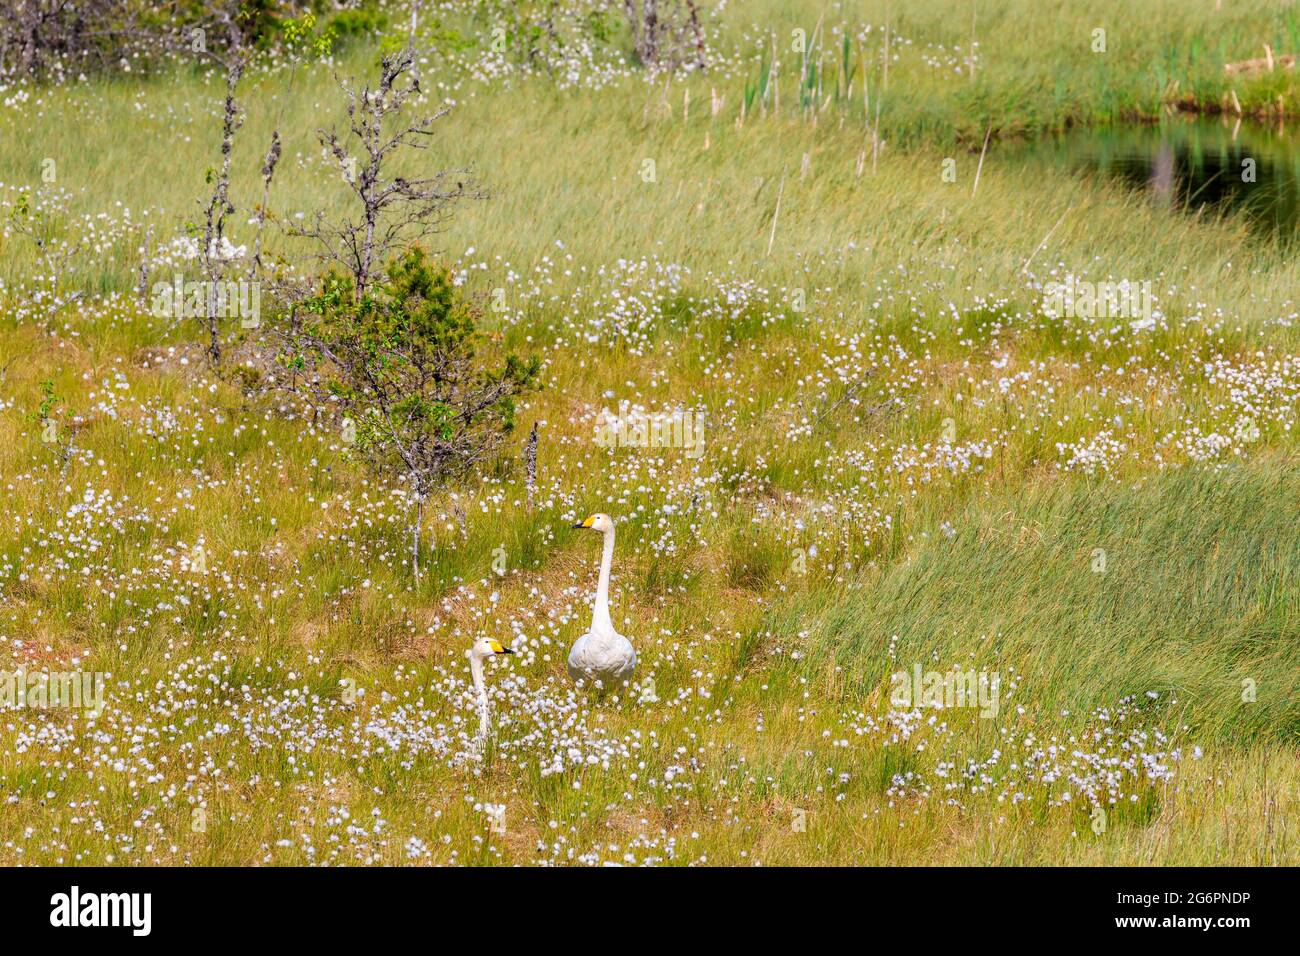 Whooper swans on the bog with flowering hare's tail Stock Photo